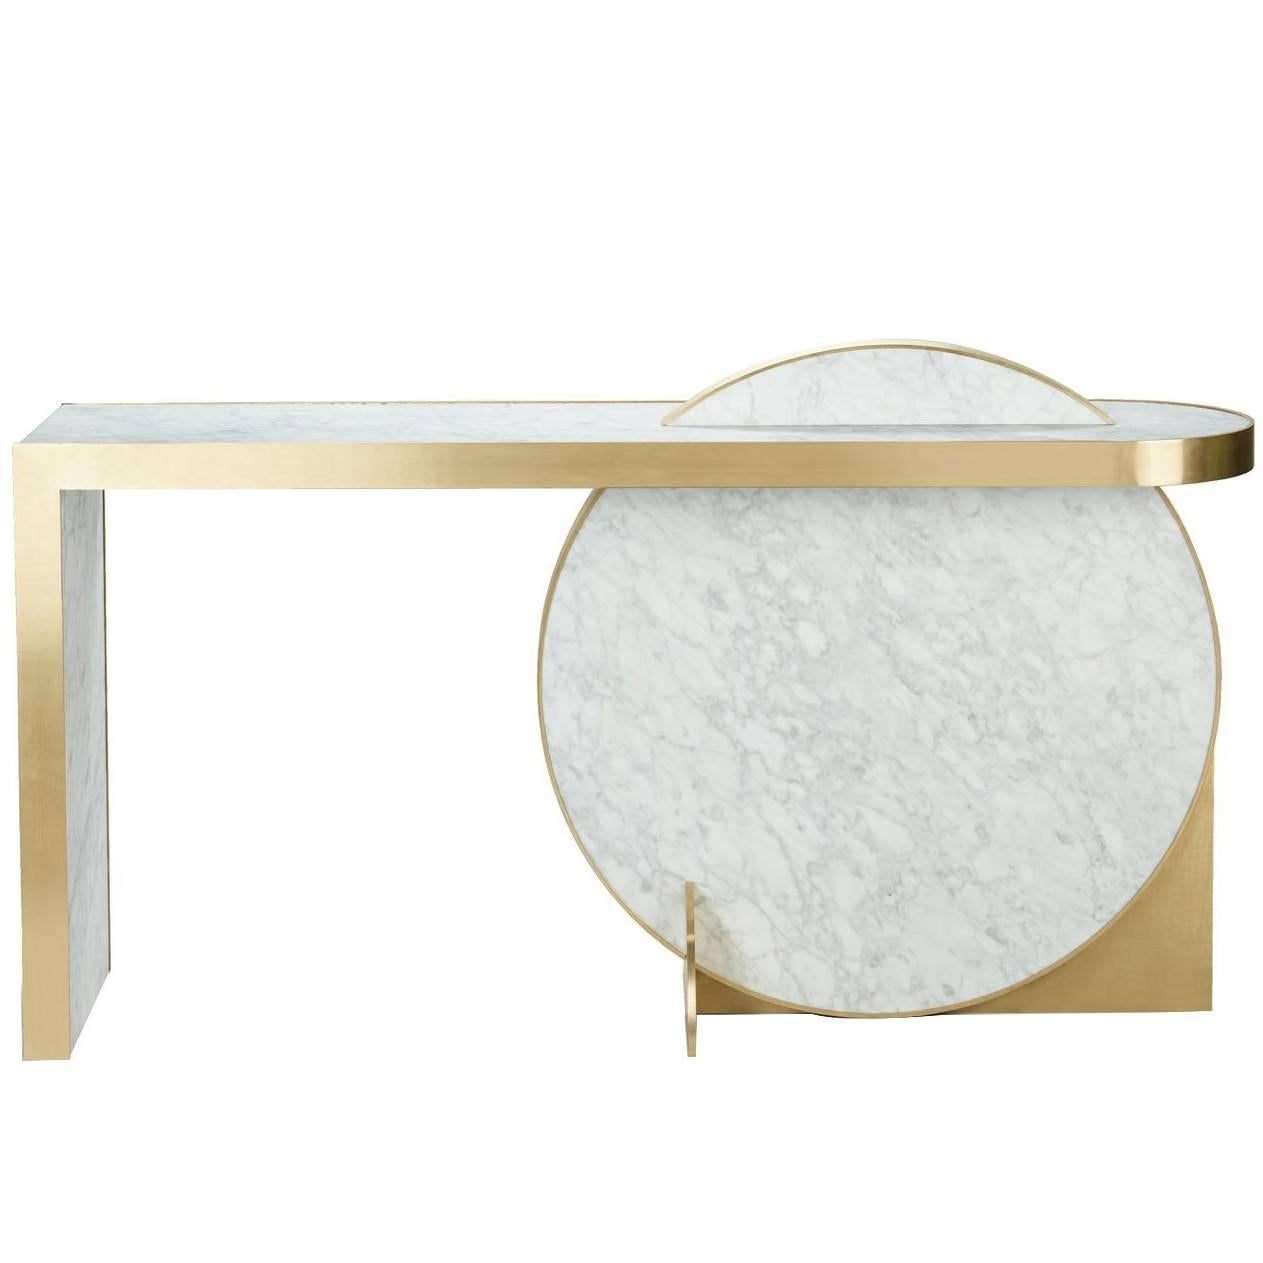 The Collision Console Carrara Marble and Brushed Brass by Lara Bohinc